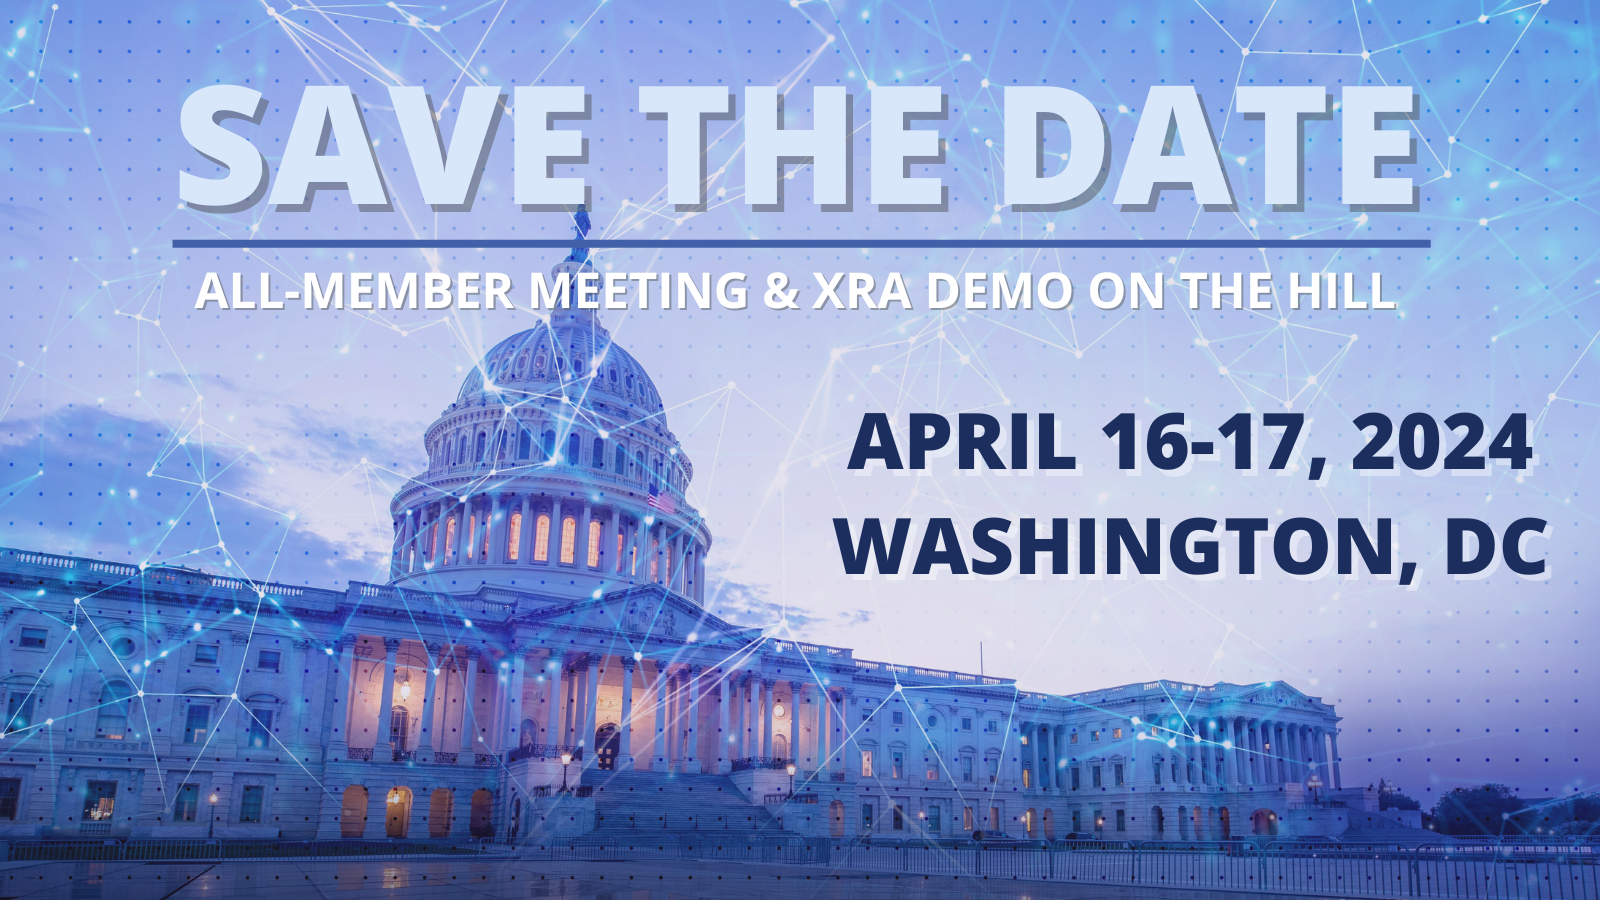 XRA ANNOUNCES DATES FOR ANNUAL ALL-MEMBER MEETING AND XRA DEMO ON THE HILL